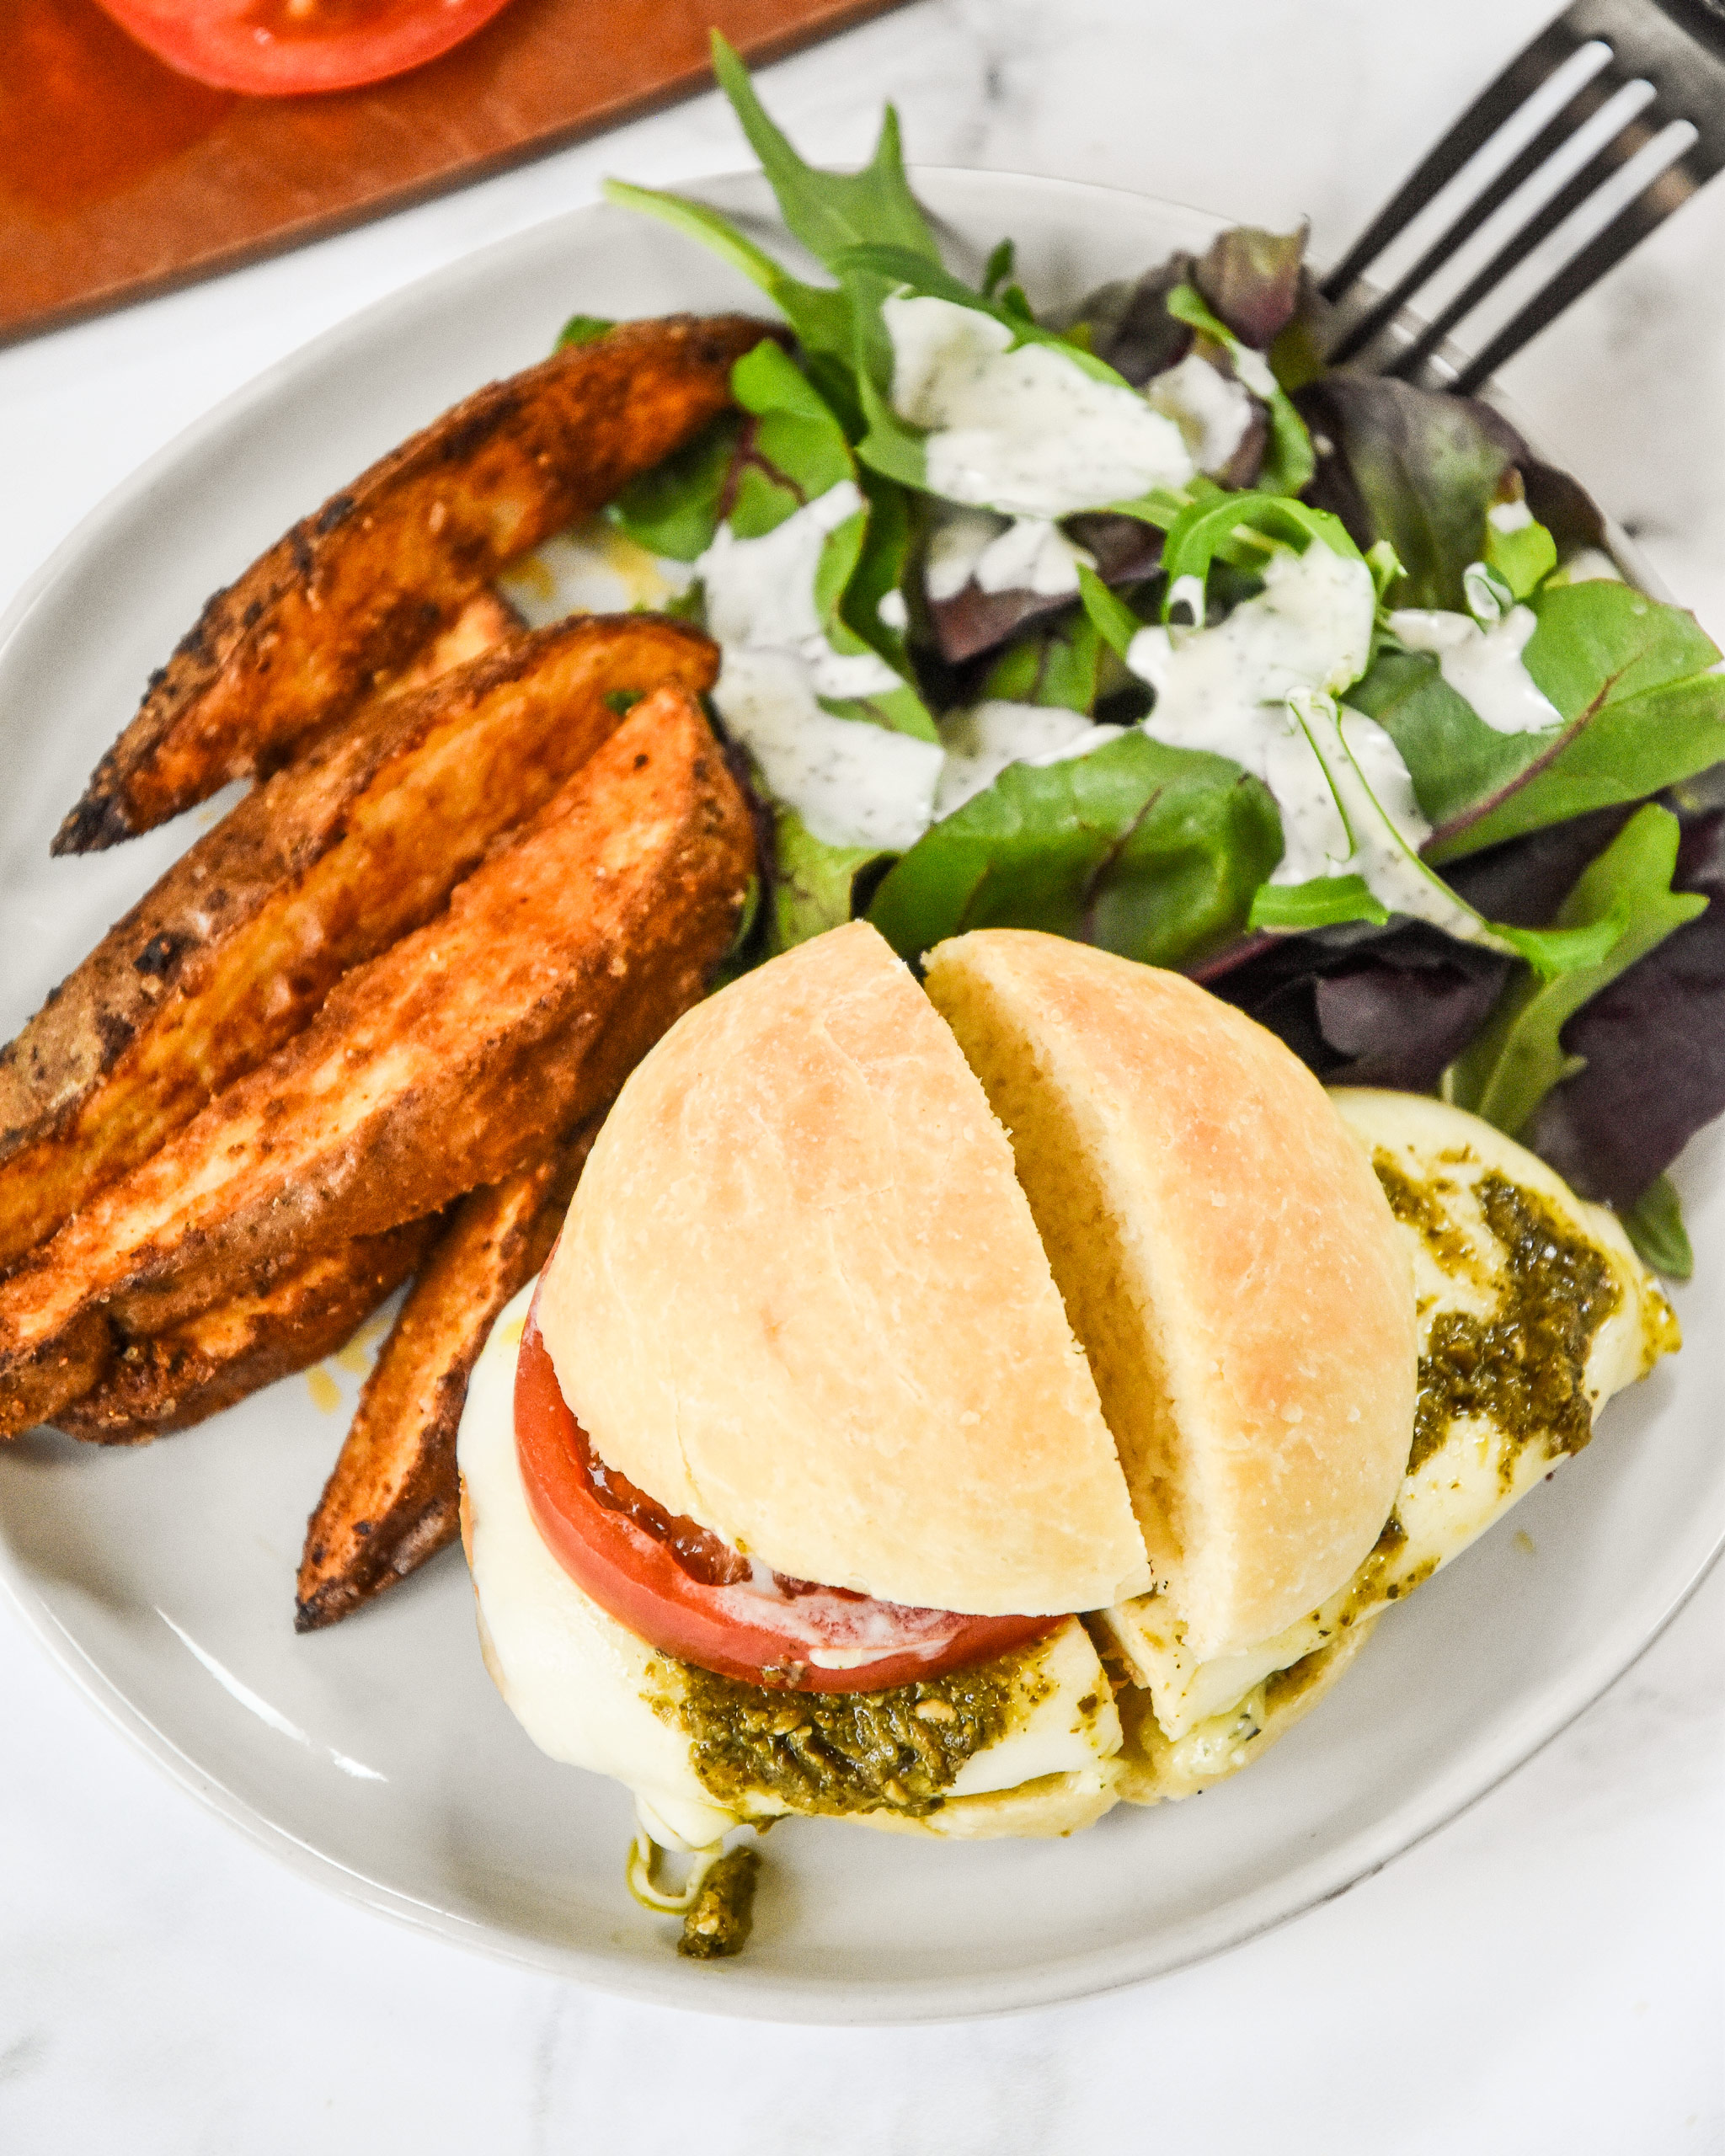 pesto chicken mozzarella sandwich on a plate with potato wedges and a salad.